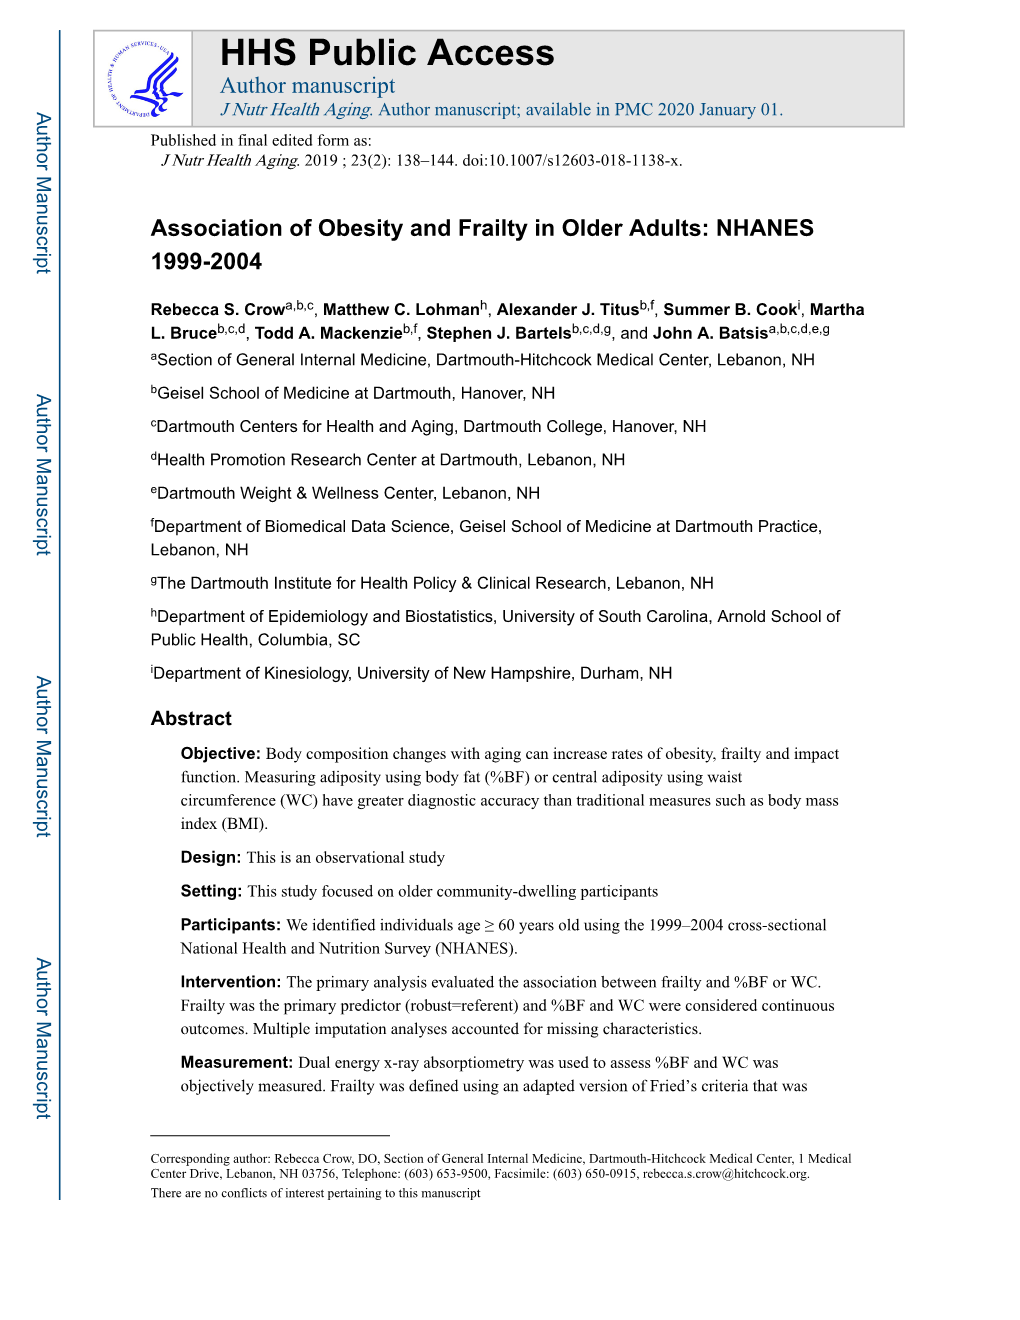 Association of Obesity and Frailty in Older Adults: NHANES 1999-2004